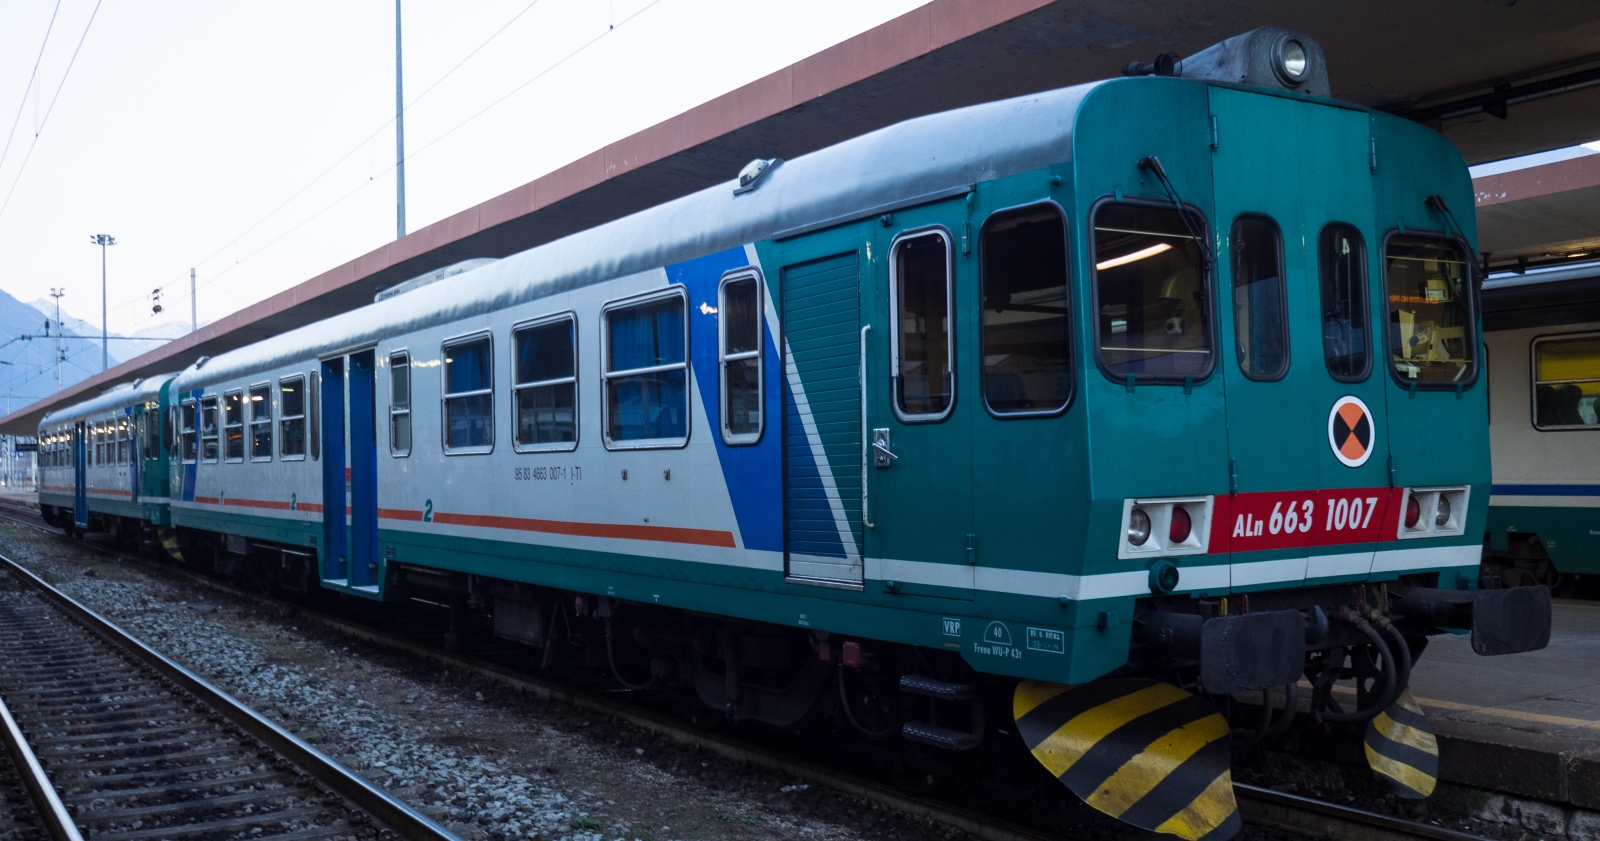 ALn 663 1007 in multiple with a second railcar on January 31, 2016 in Domodossola